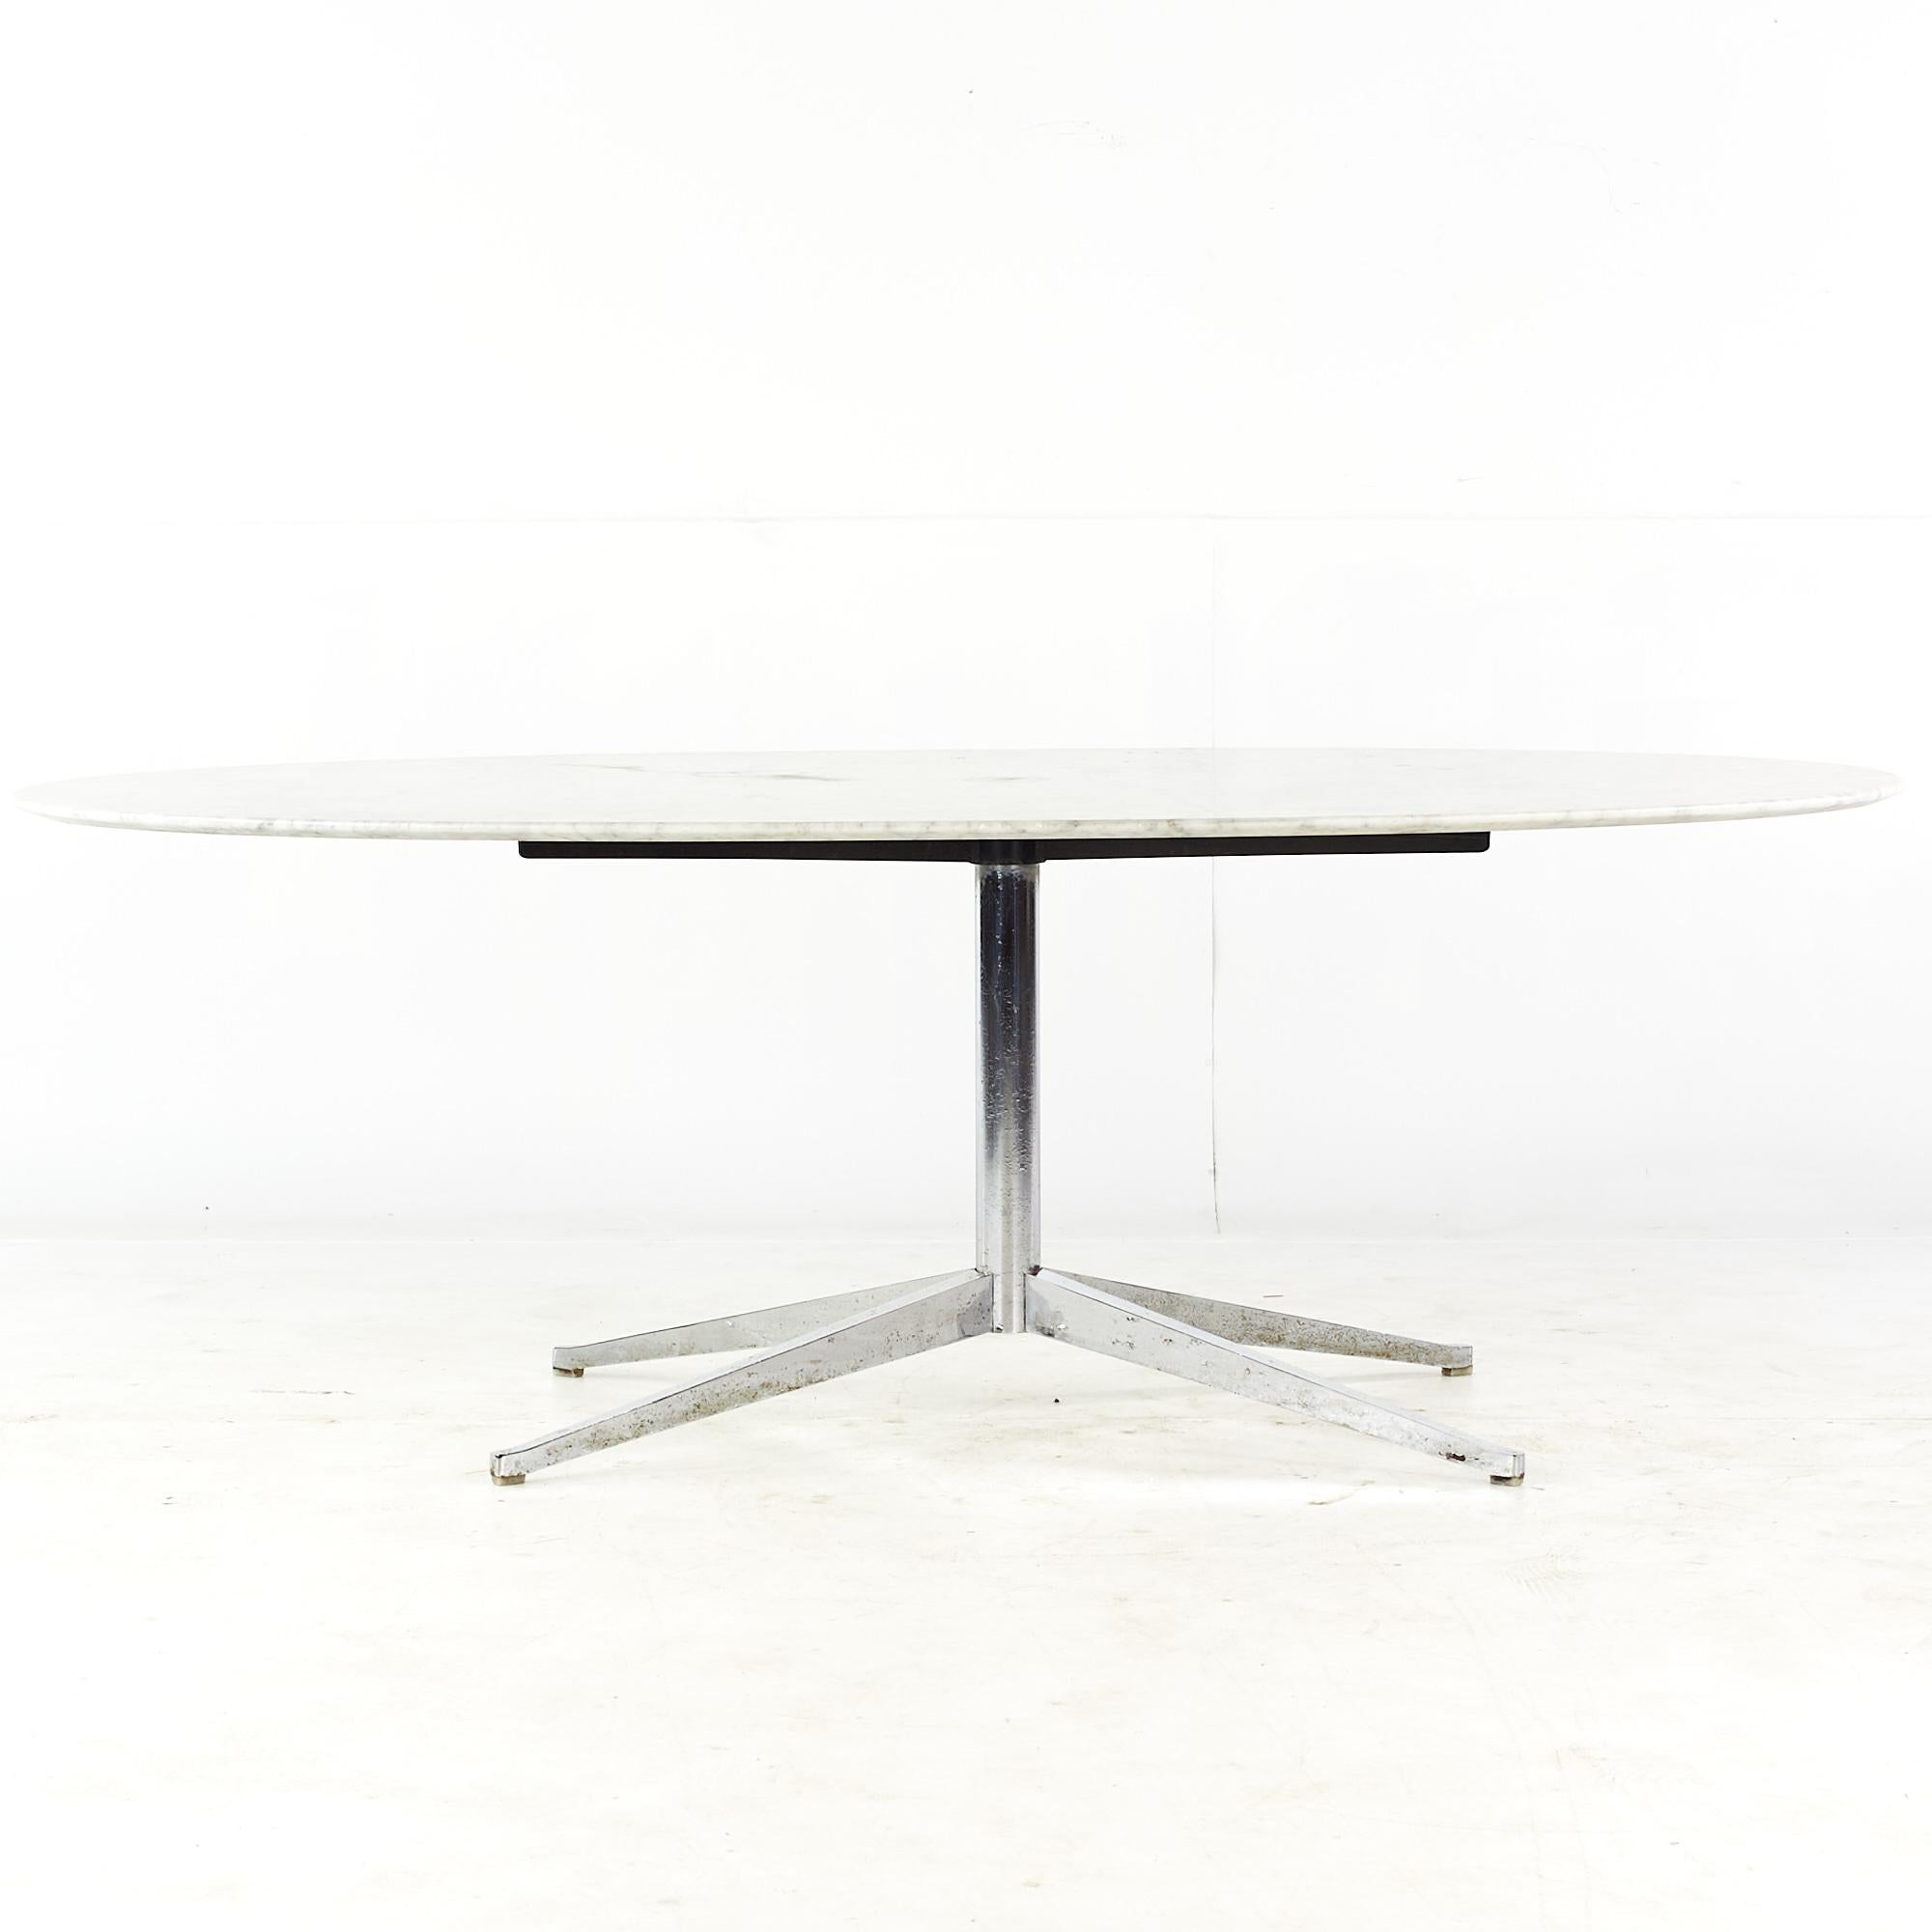 Florence Knoll Style Mid Century White marble and chrome dining table

This table measures: 78.5 wide x 48 deep x 27.5 inches high, with a chair clearance of 26.75 inches

All pieces of furniture can be had in what we call restored vintage